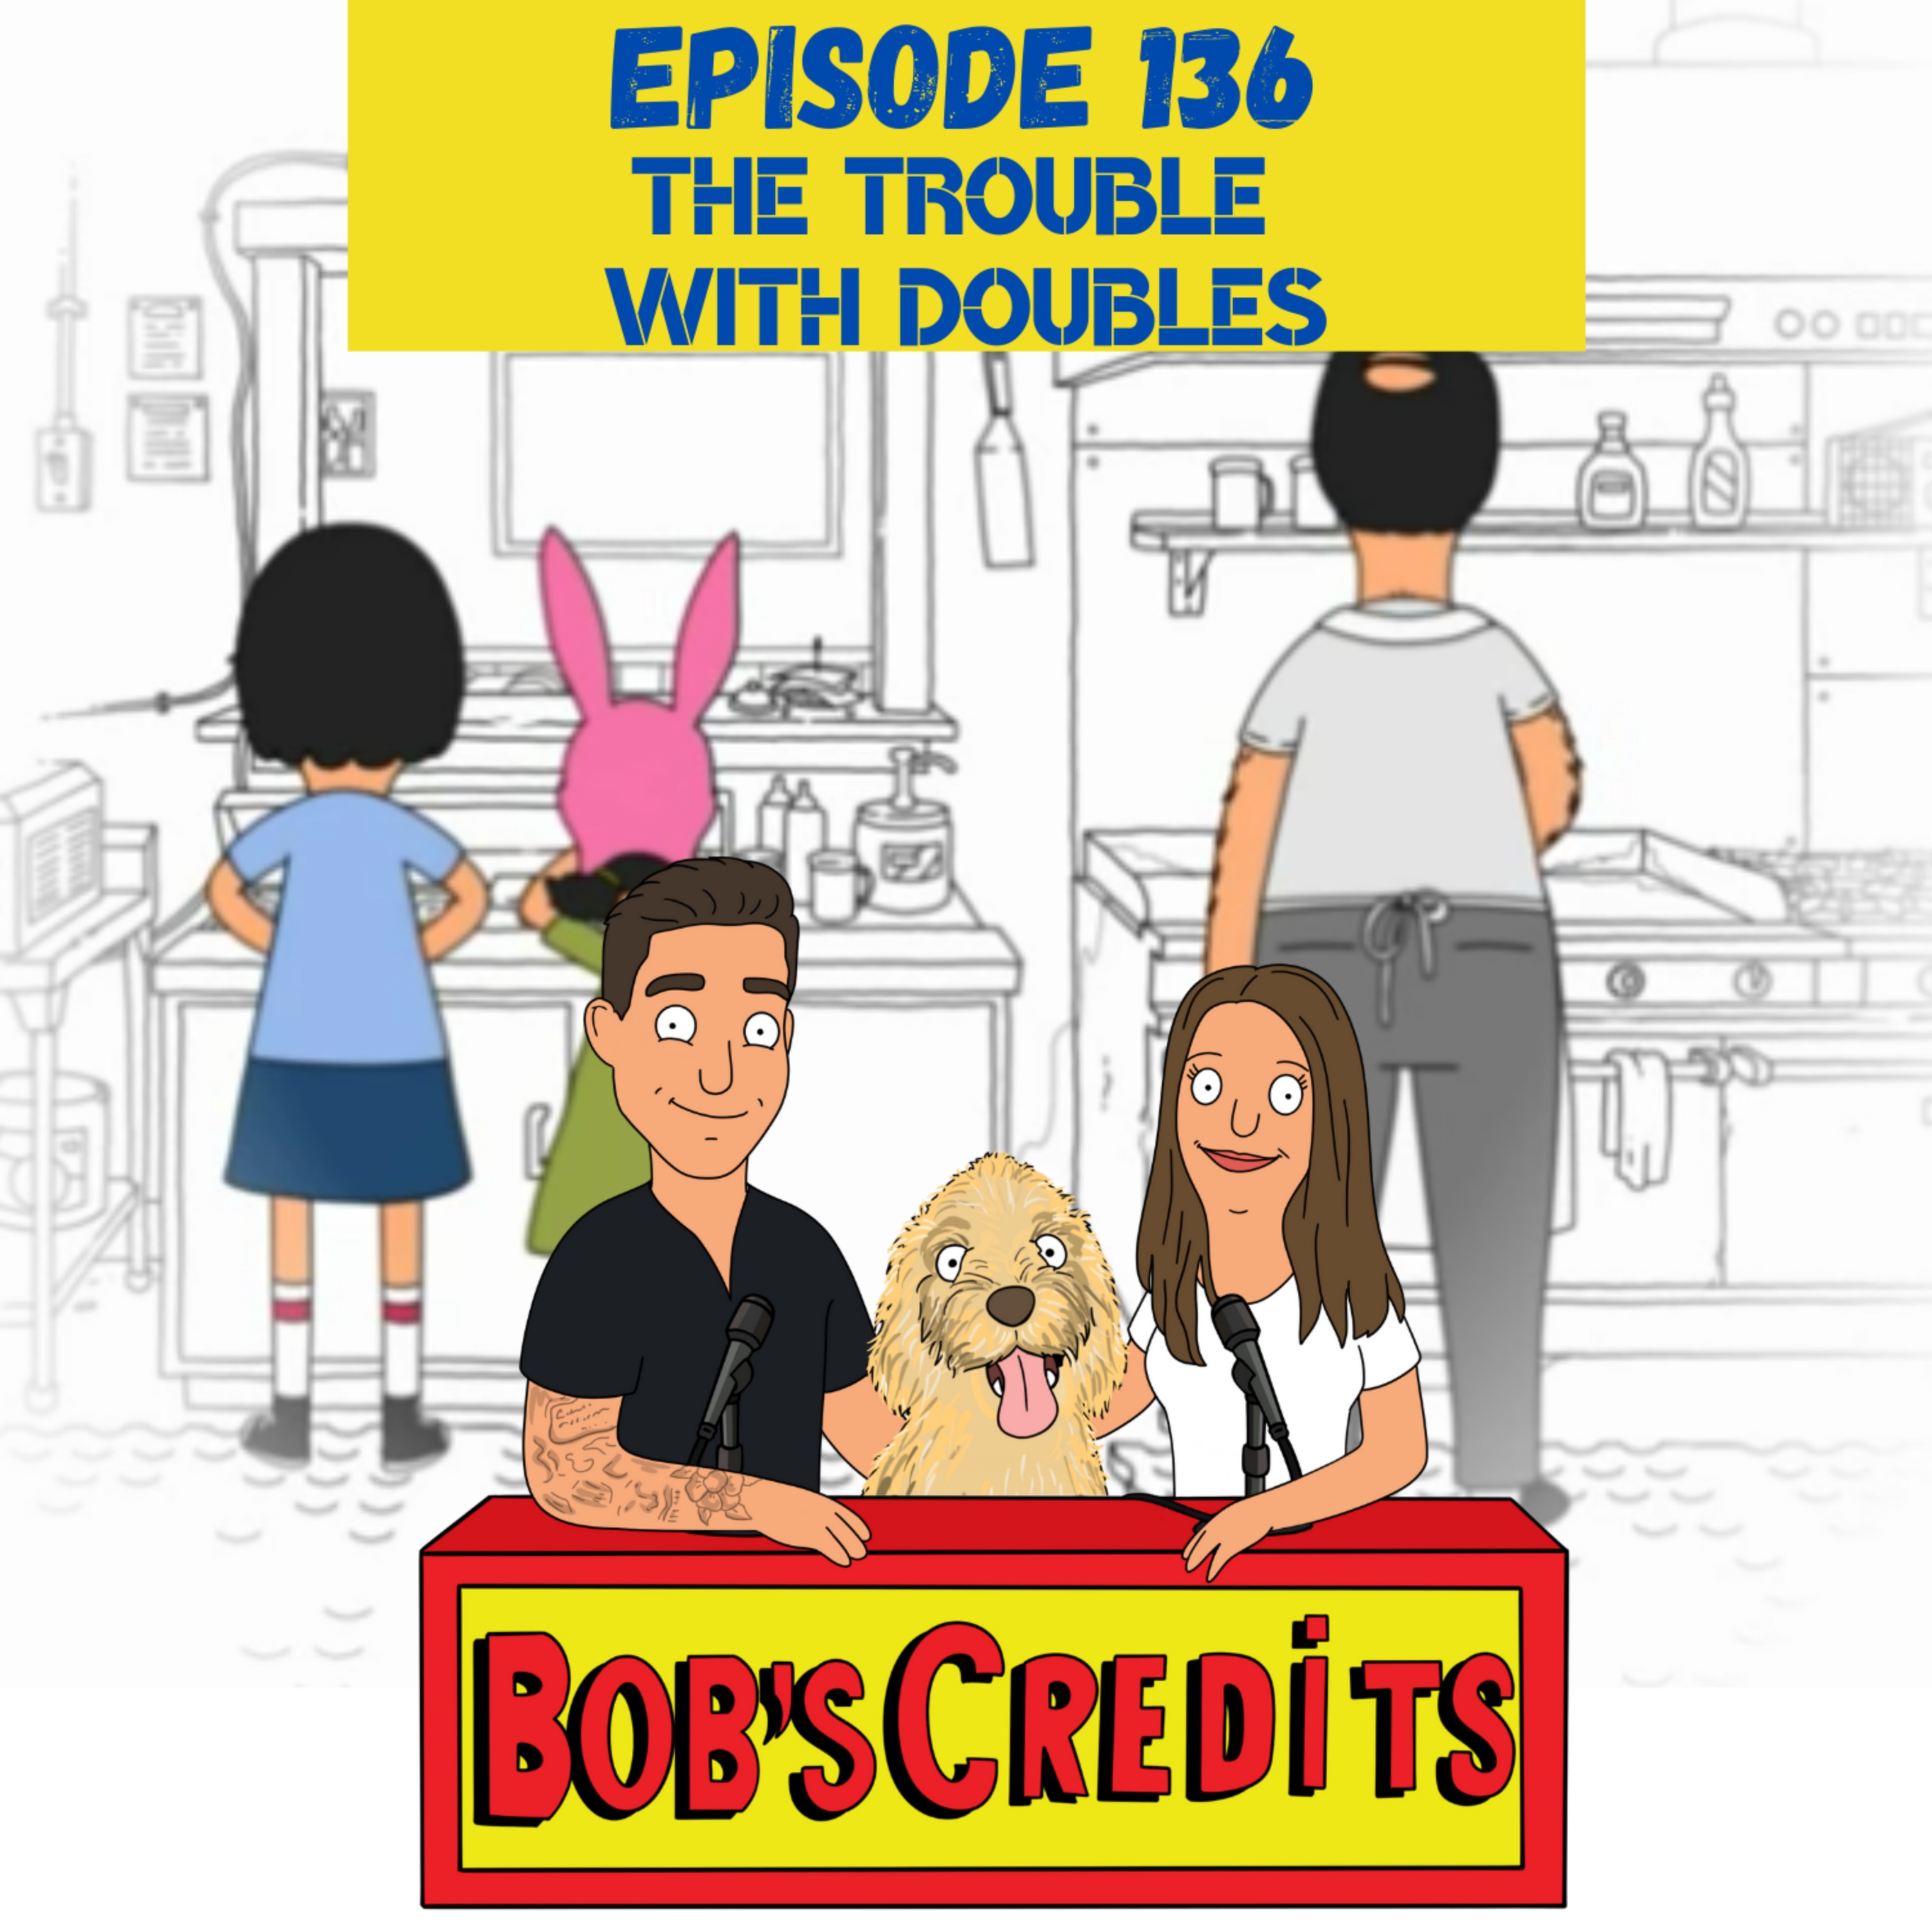 The Trouble with Doubles (S8E14)